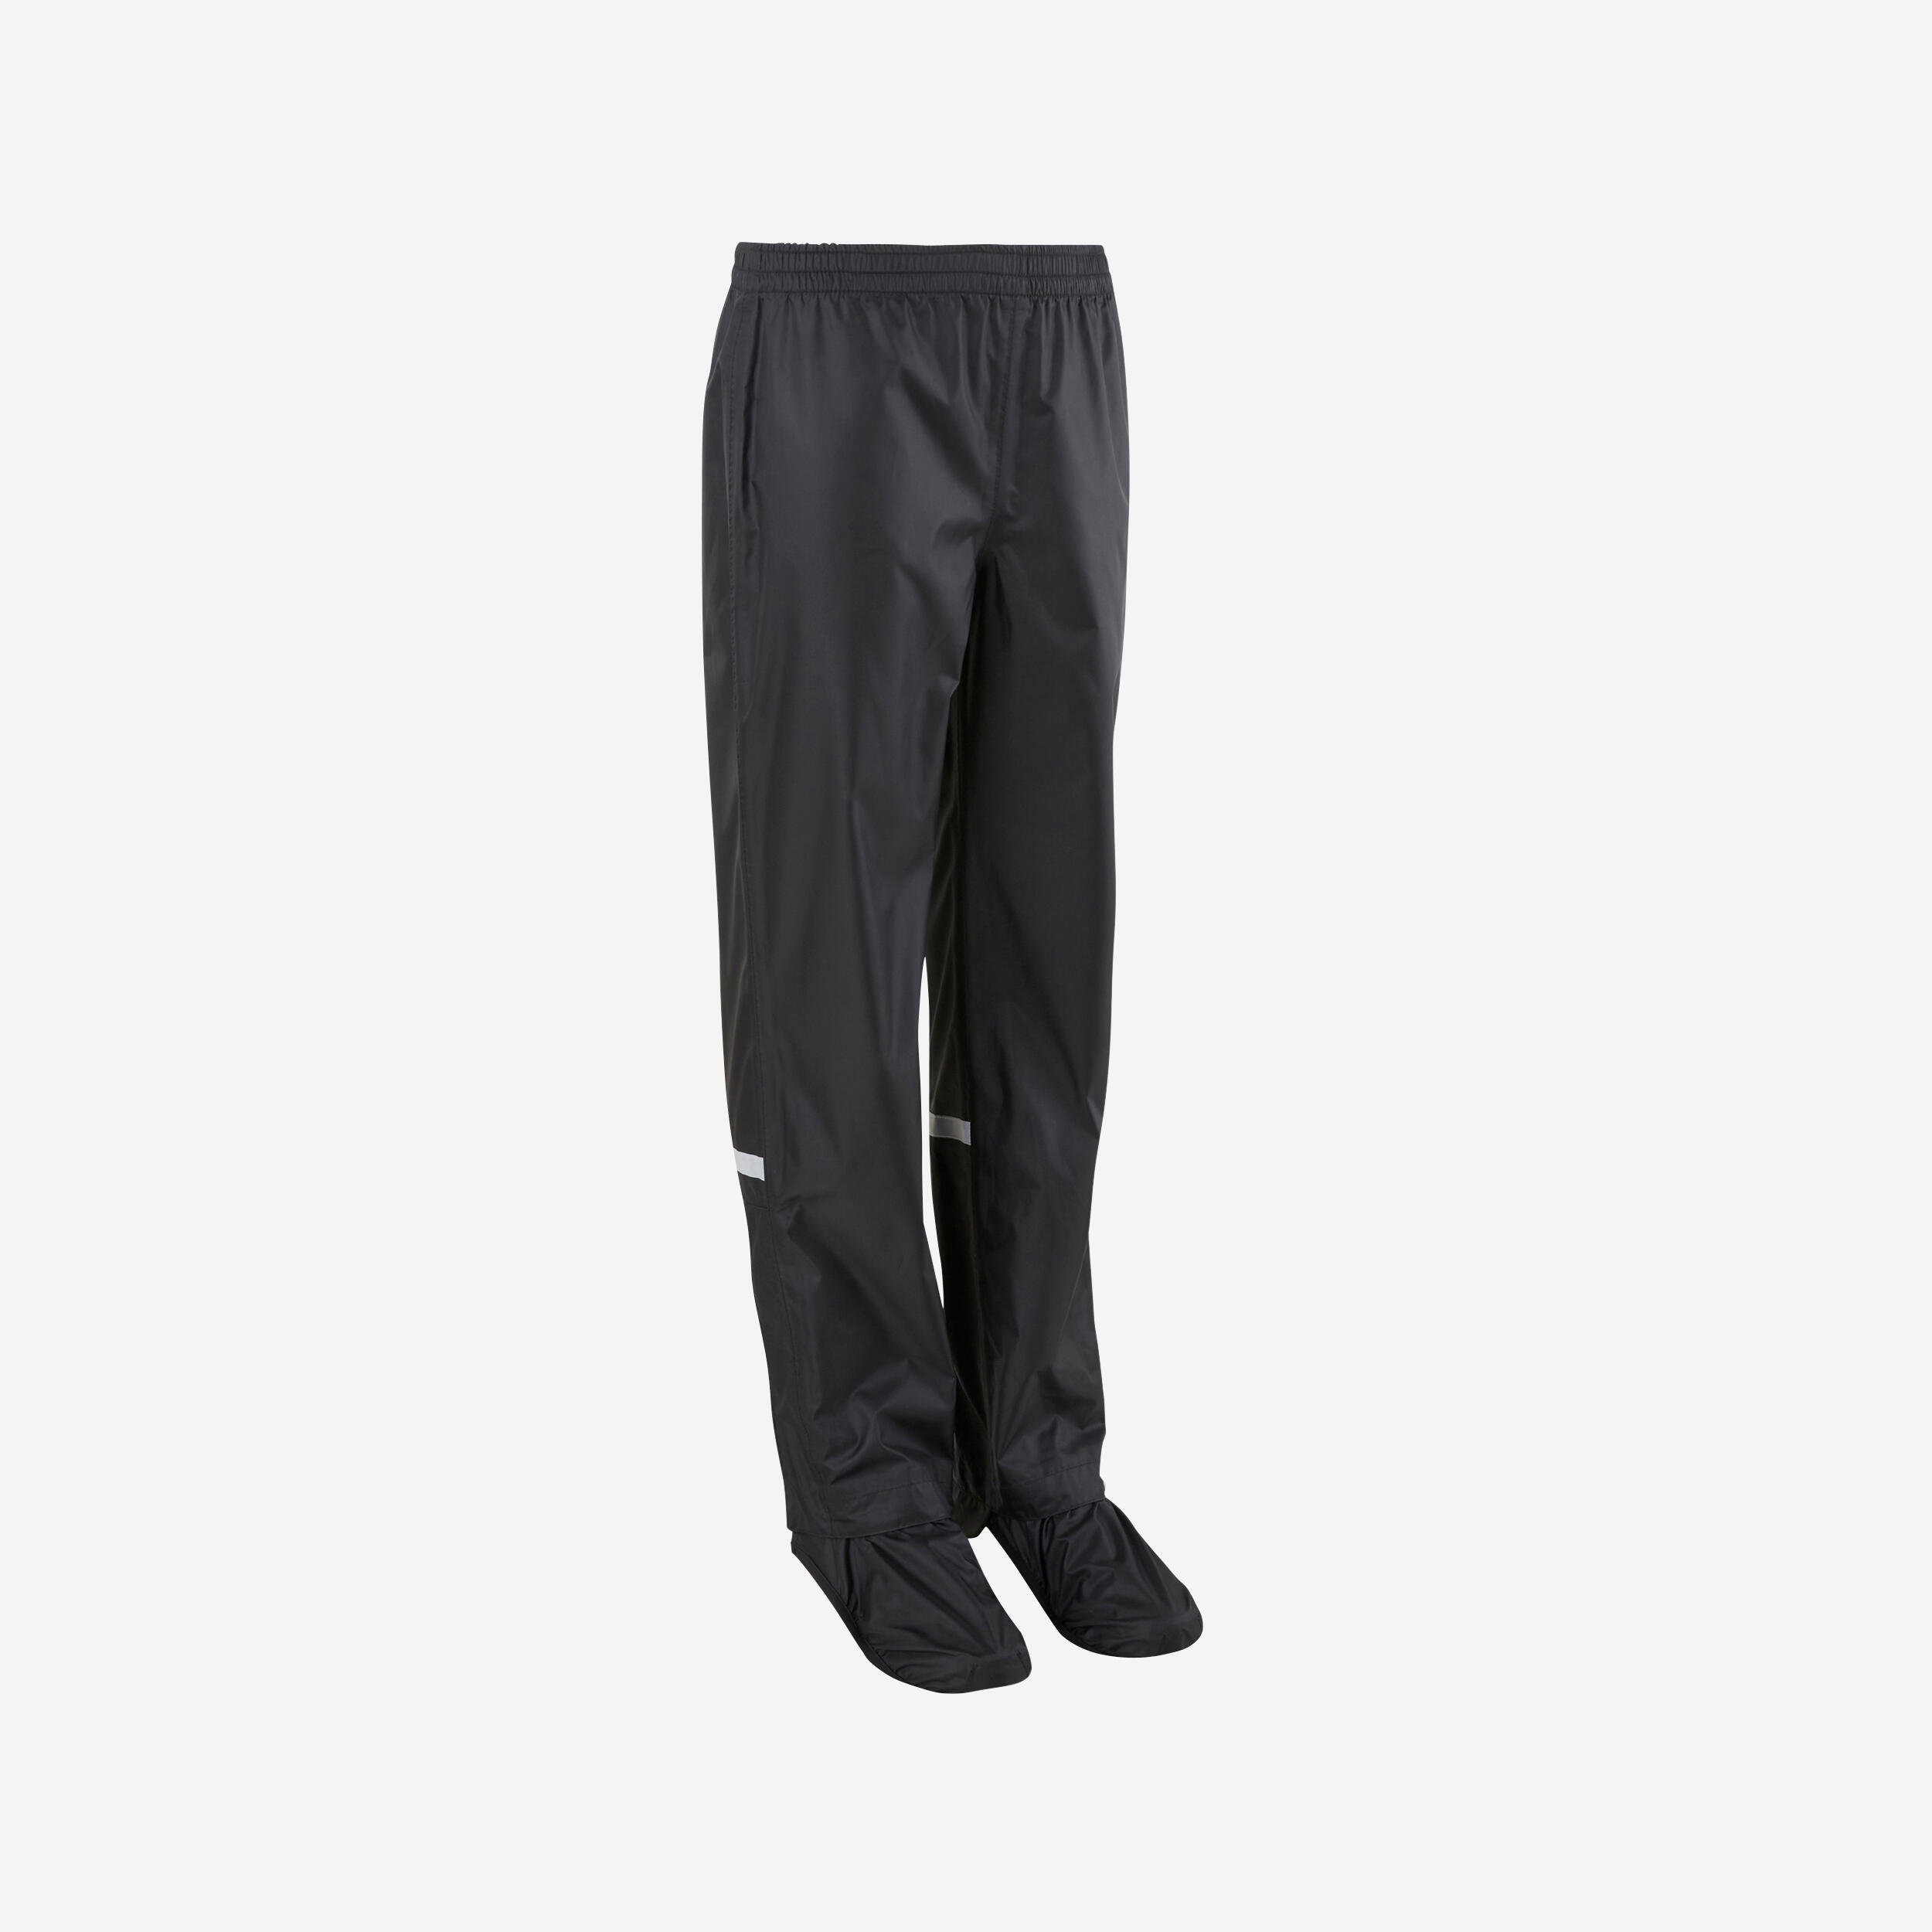 Kids' Waterproof Cycling Overtrousers 500 - Decathlon